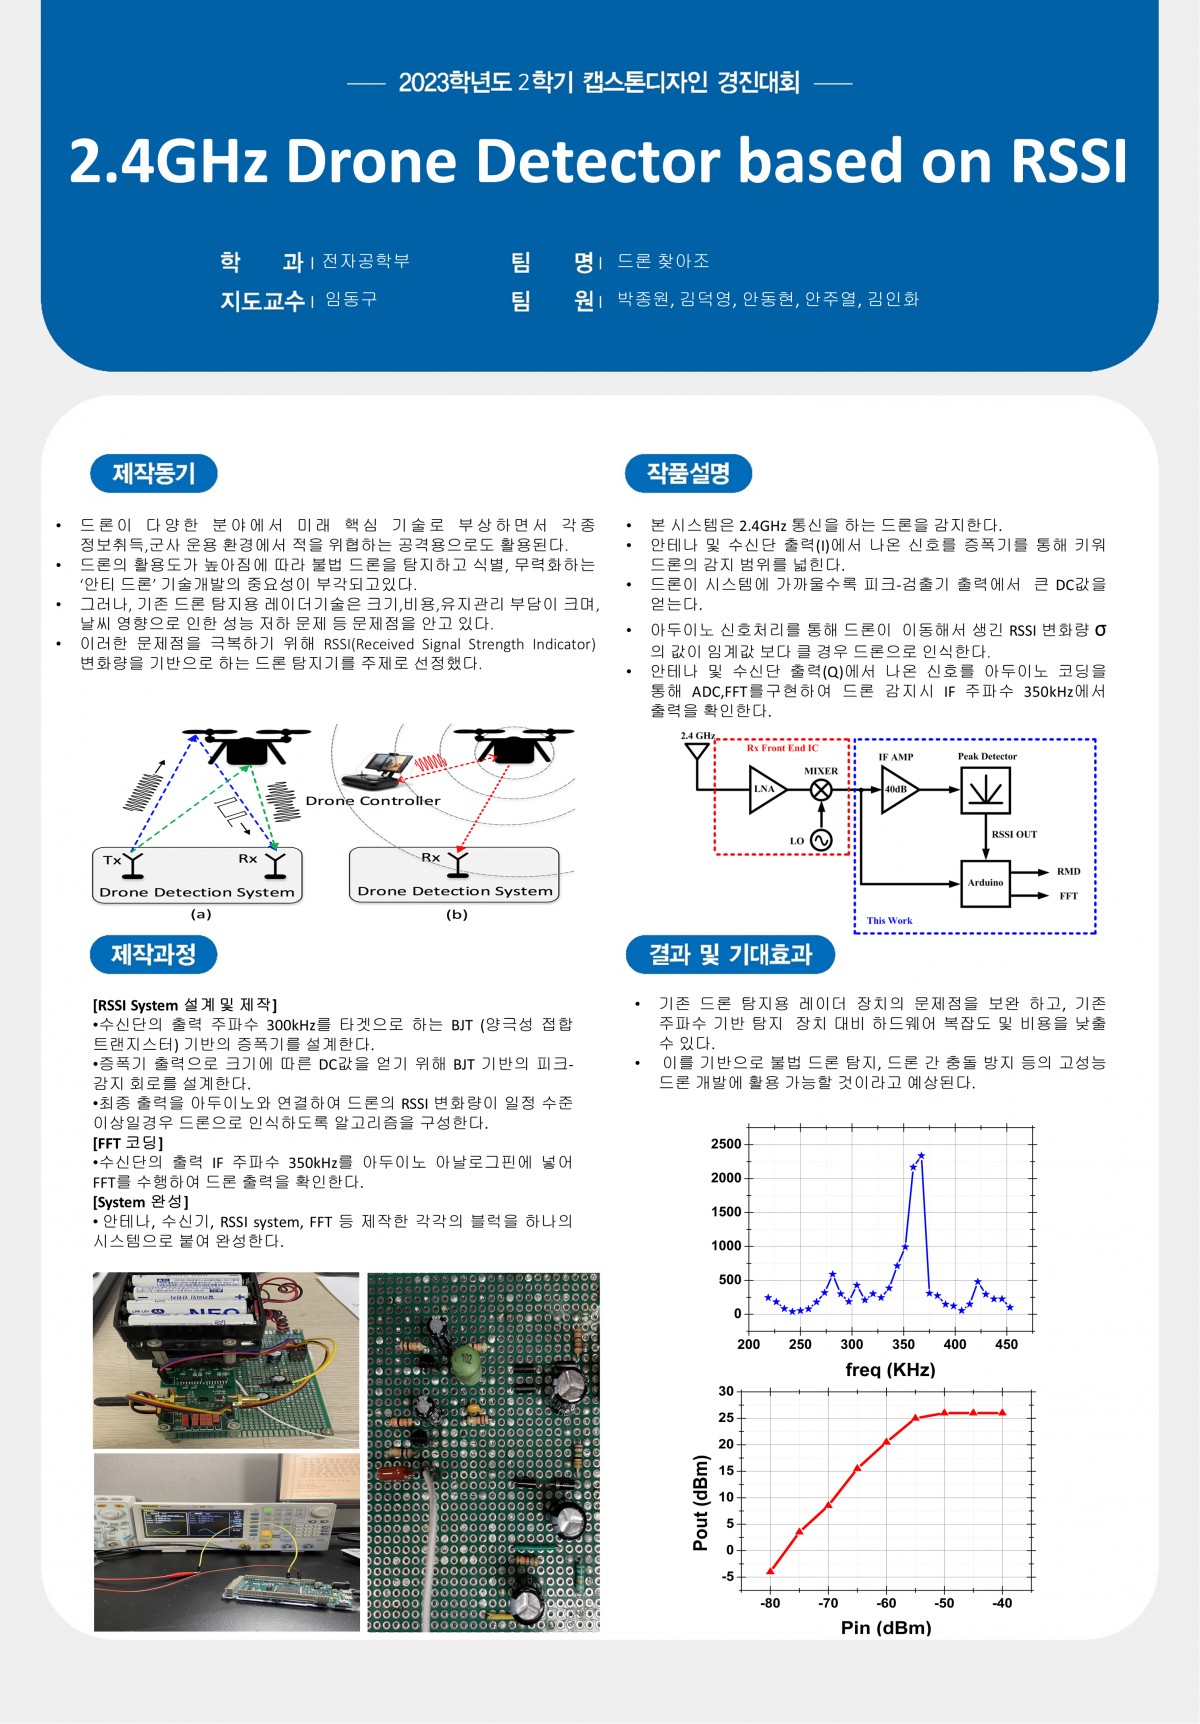 2.4GHz drone detector based on RSSI